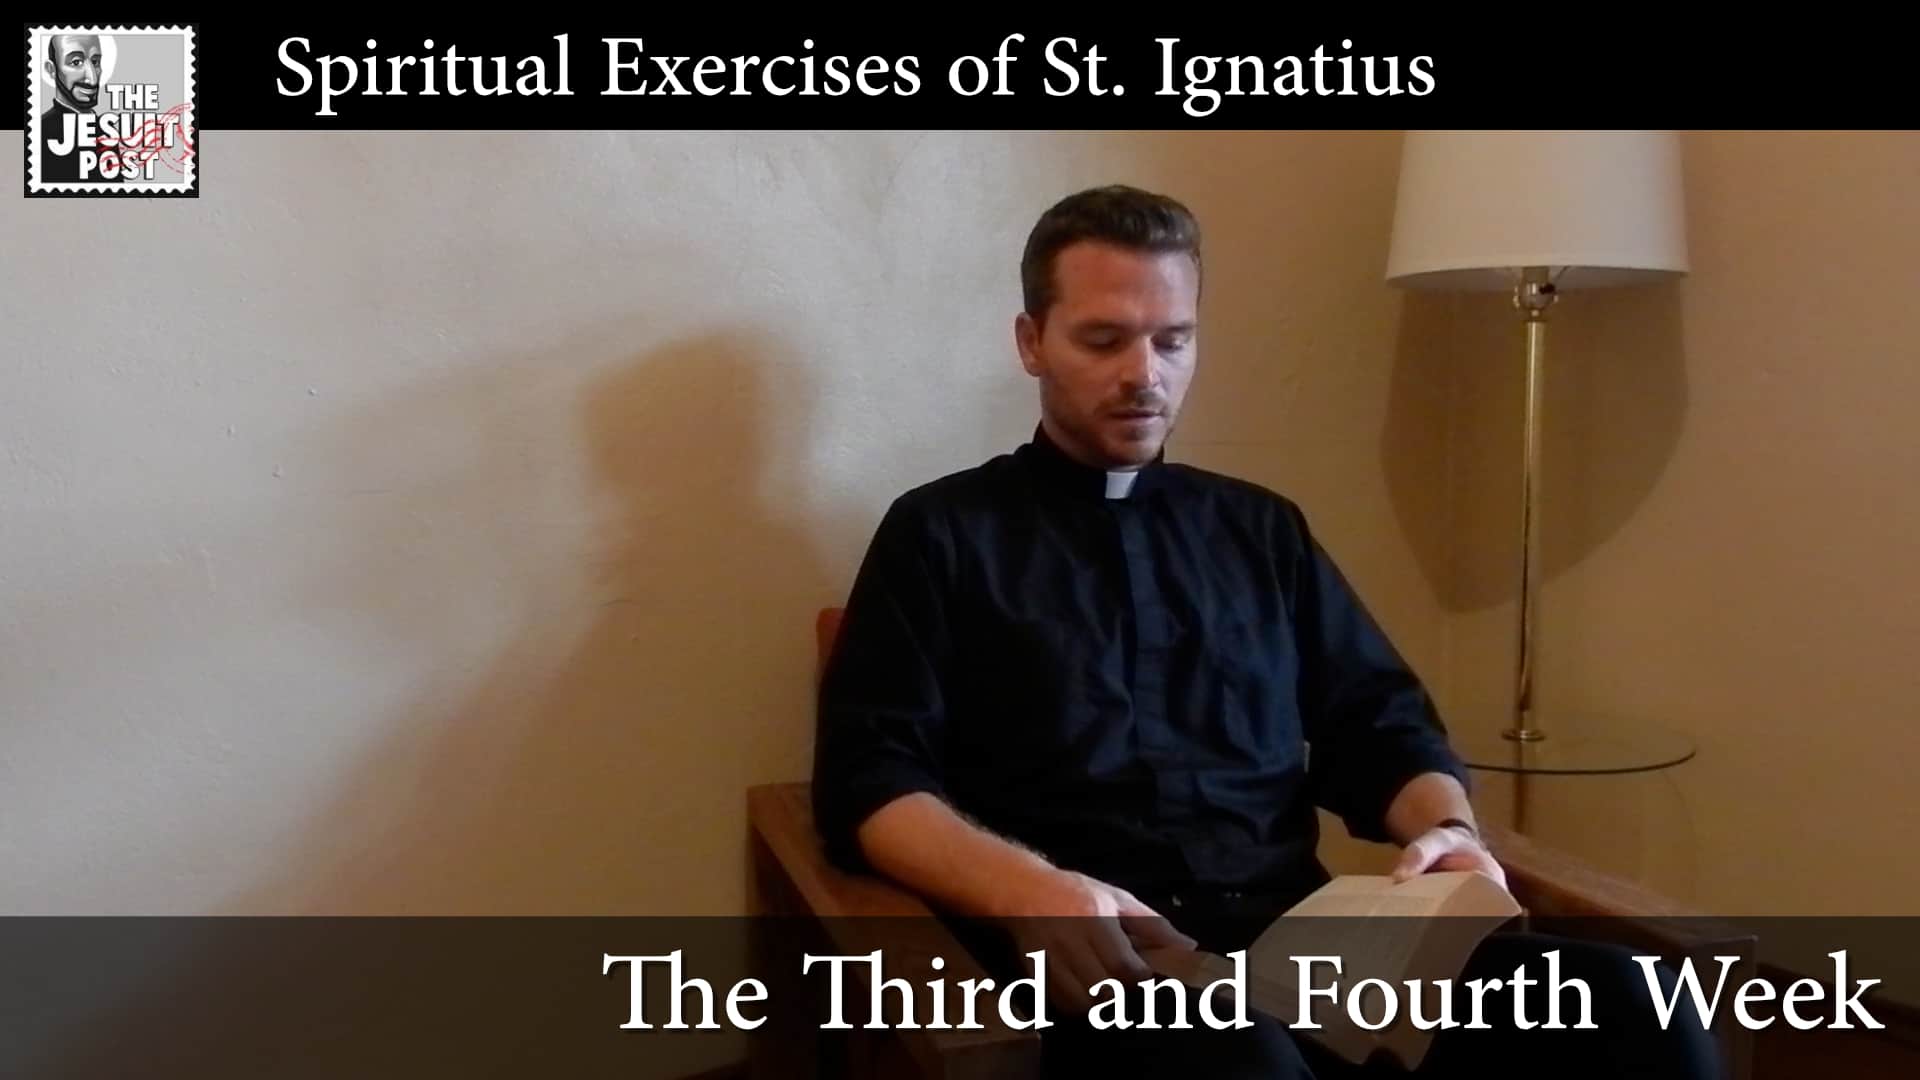 Intro to the Spiritual Exercise: The Third and Fourth Week